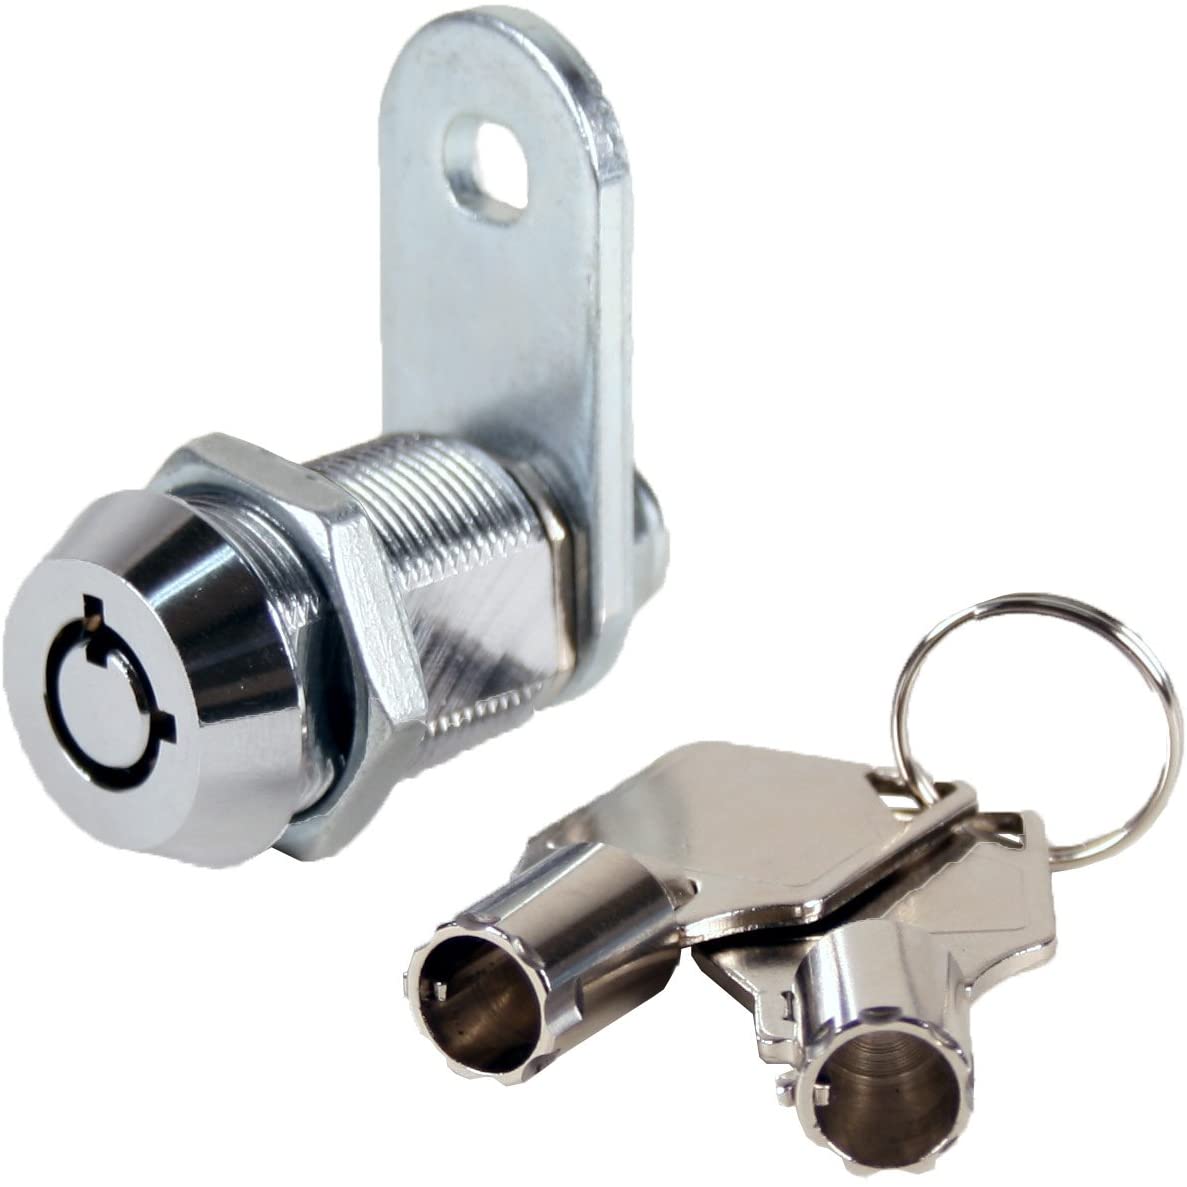 What do I need to consider when choosing the right furniture cam lock?